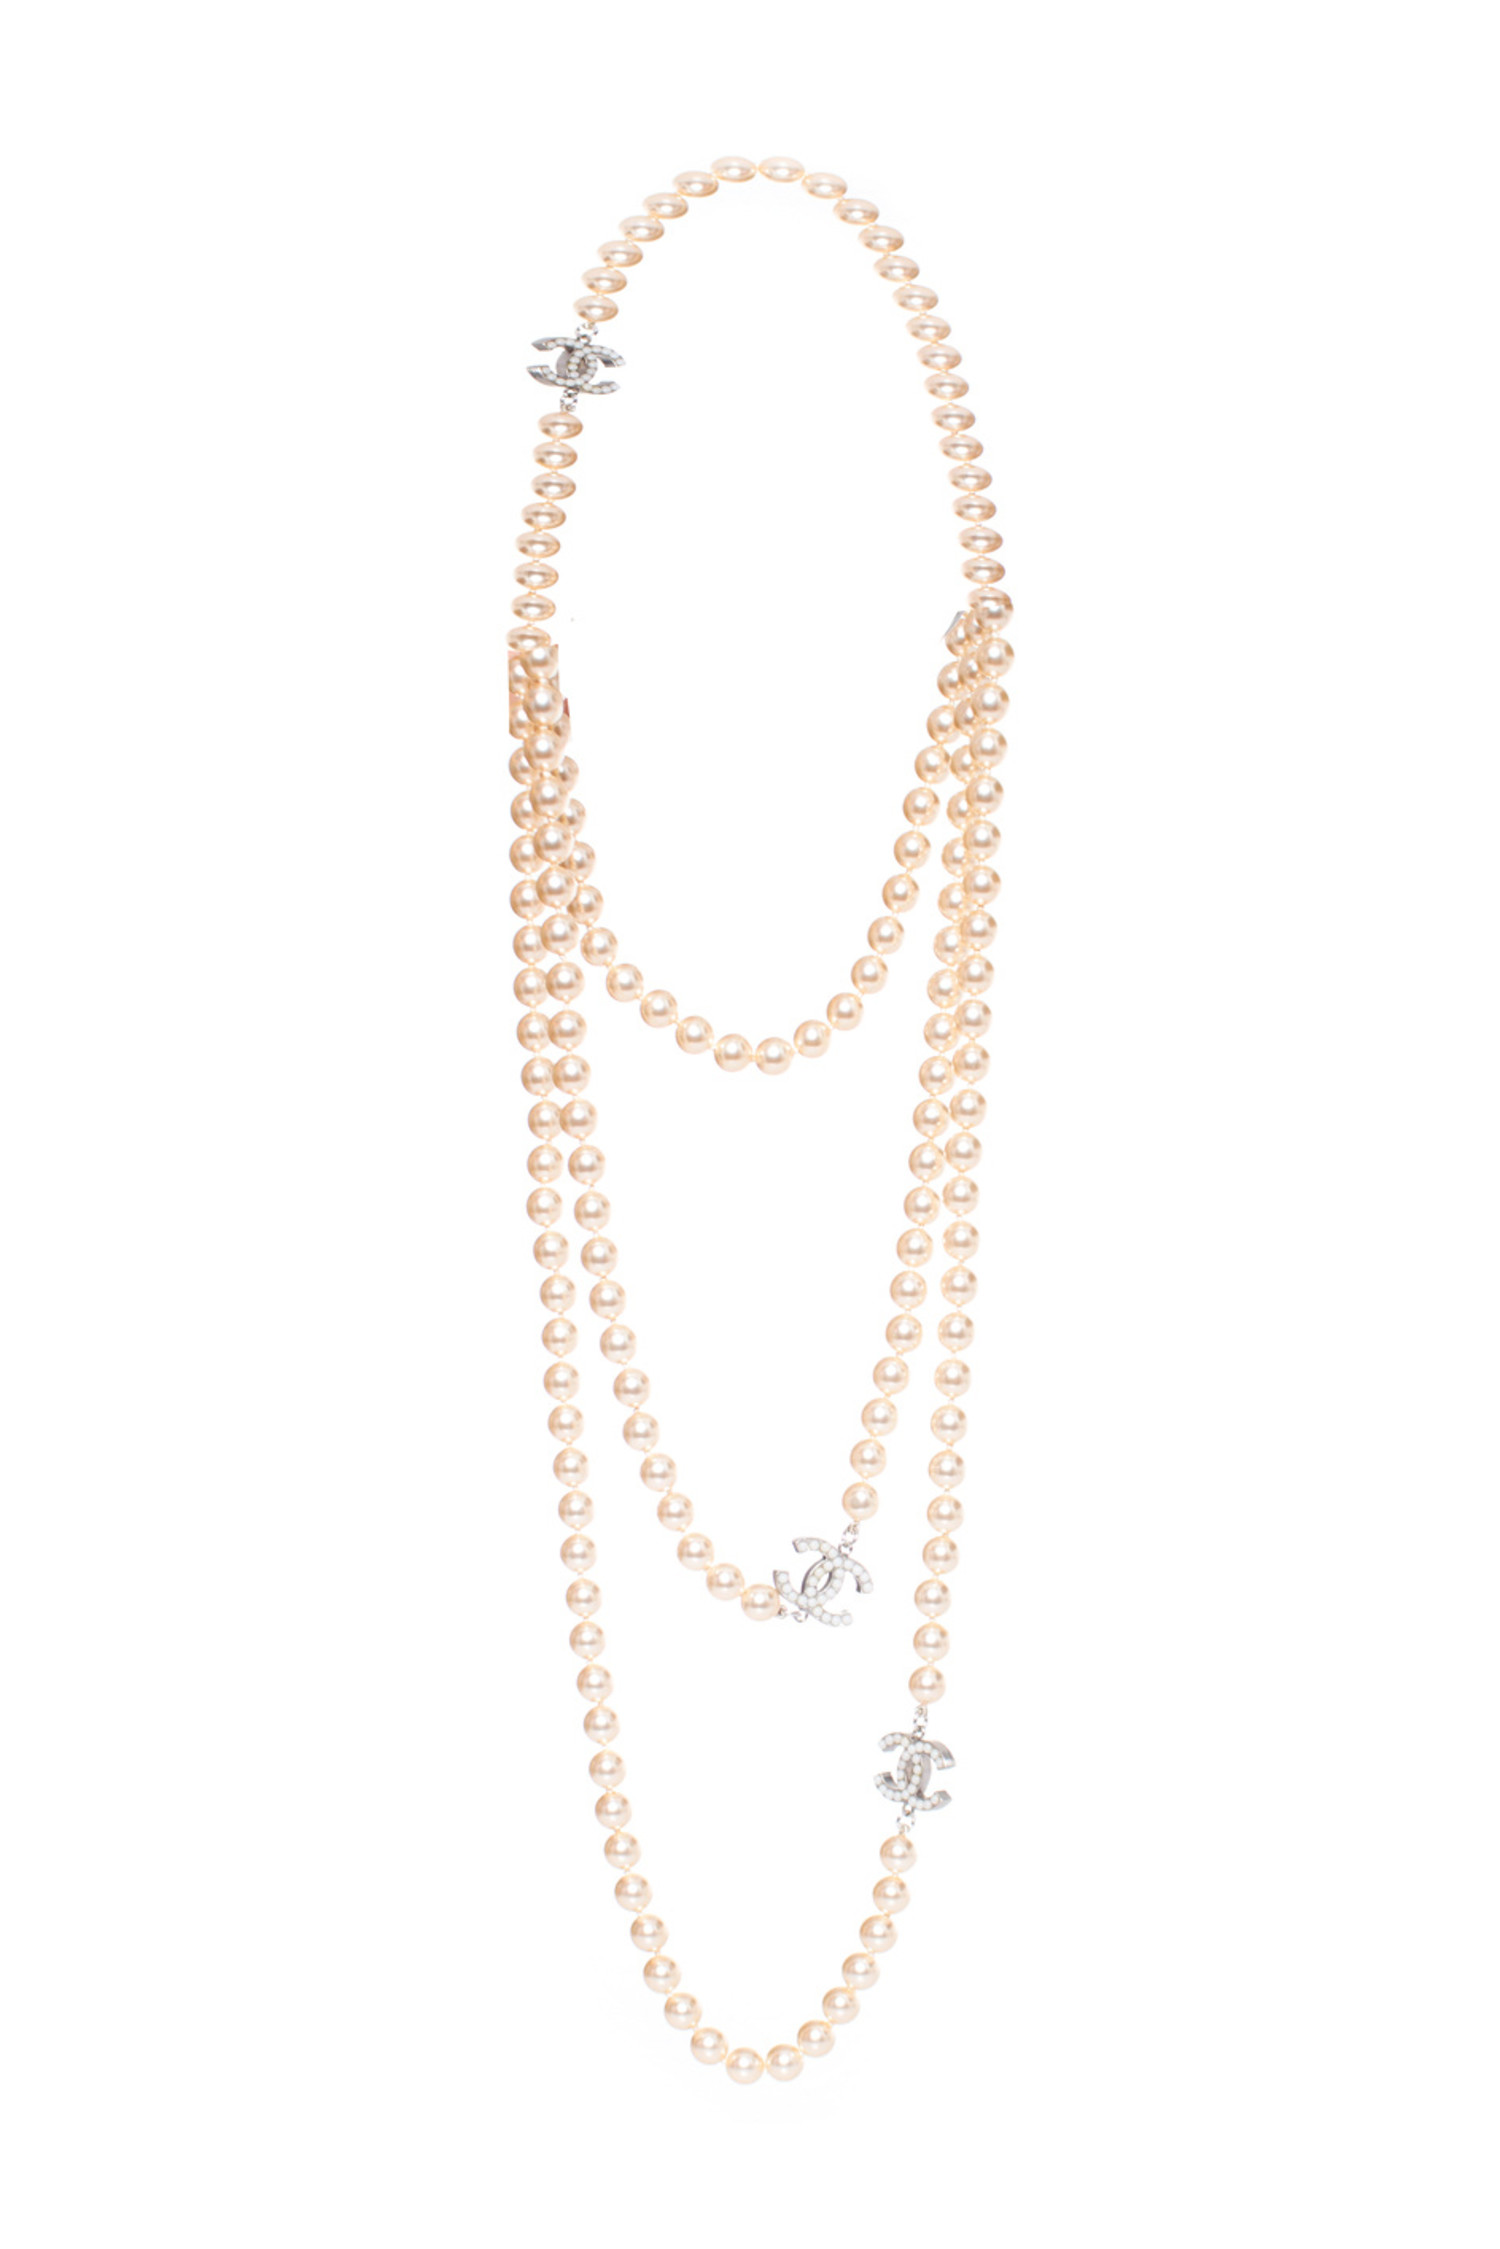 Chanel Pearl Necklace 